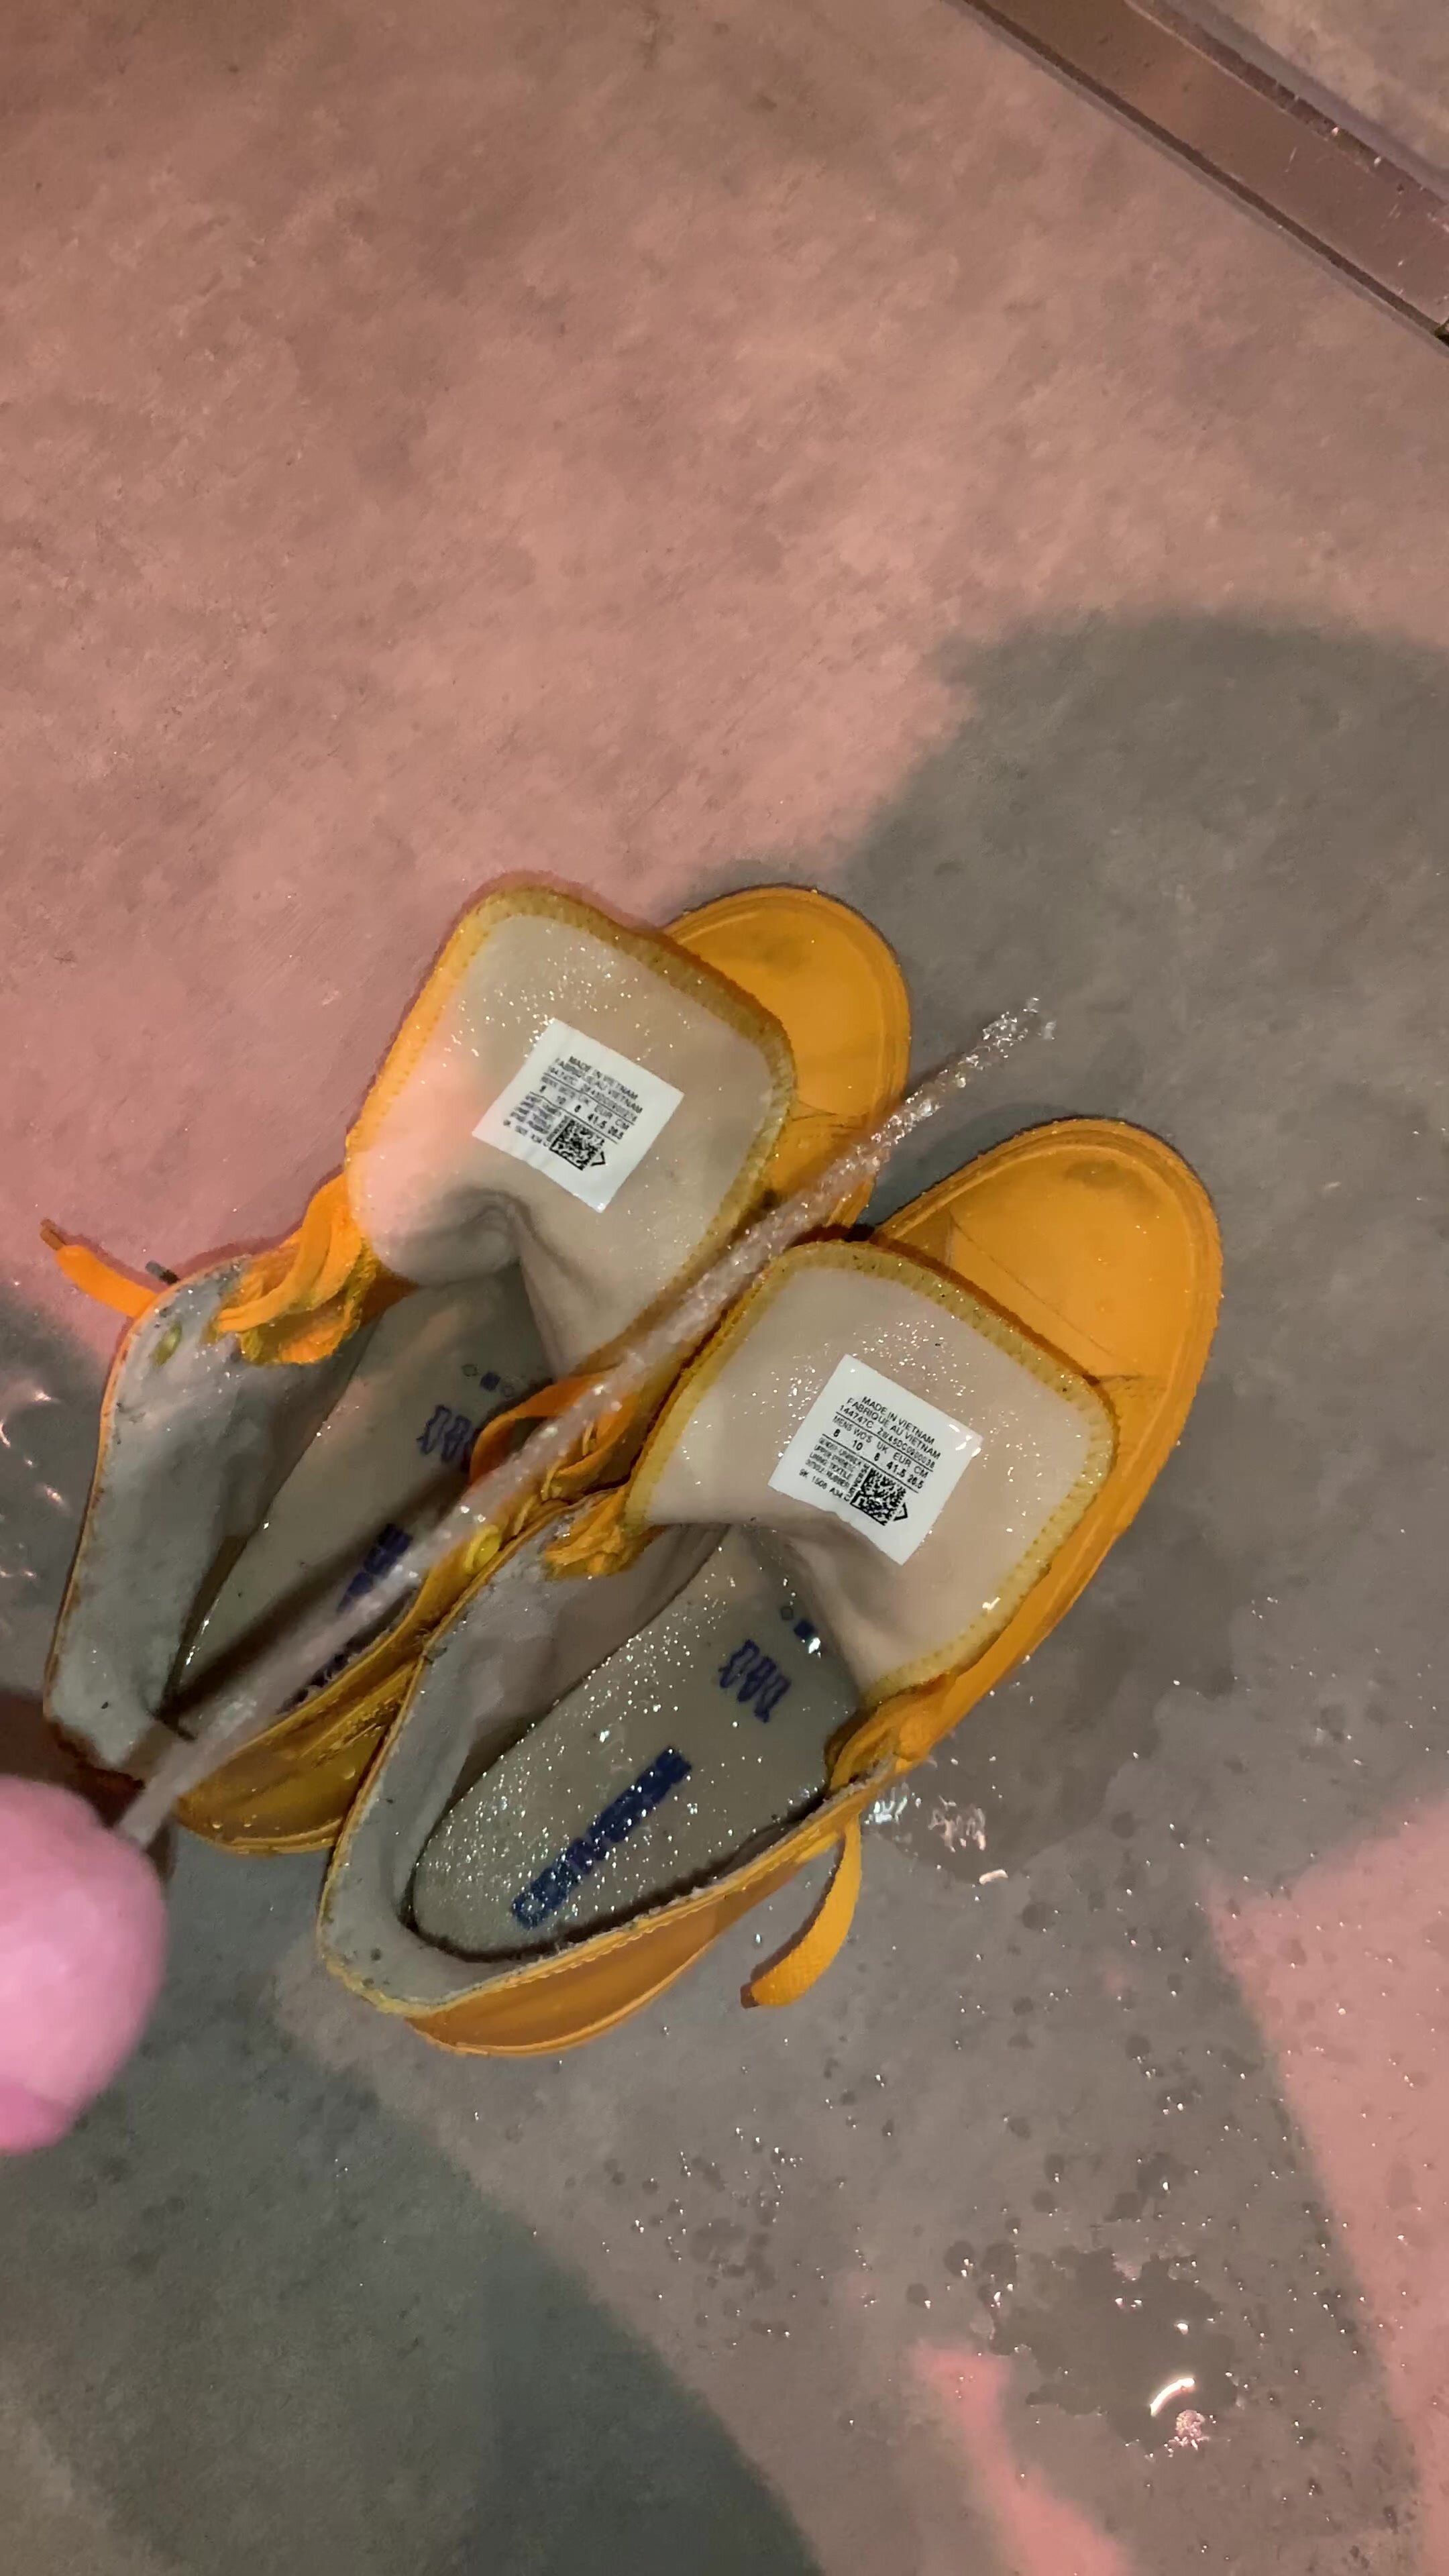 Pissing in yellow rubber Chucks